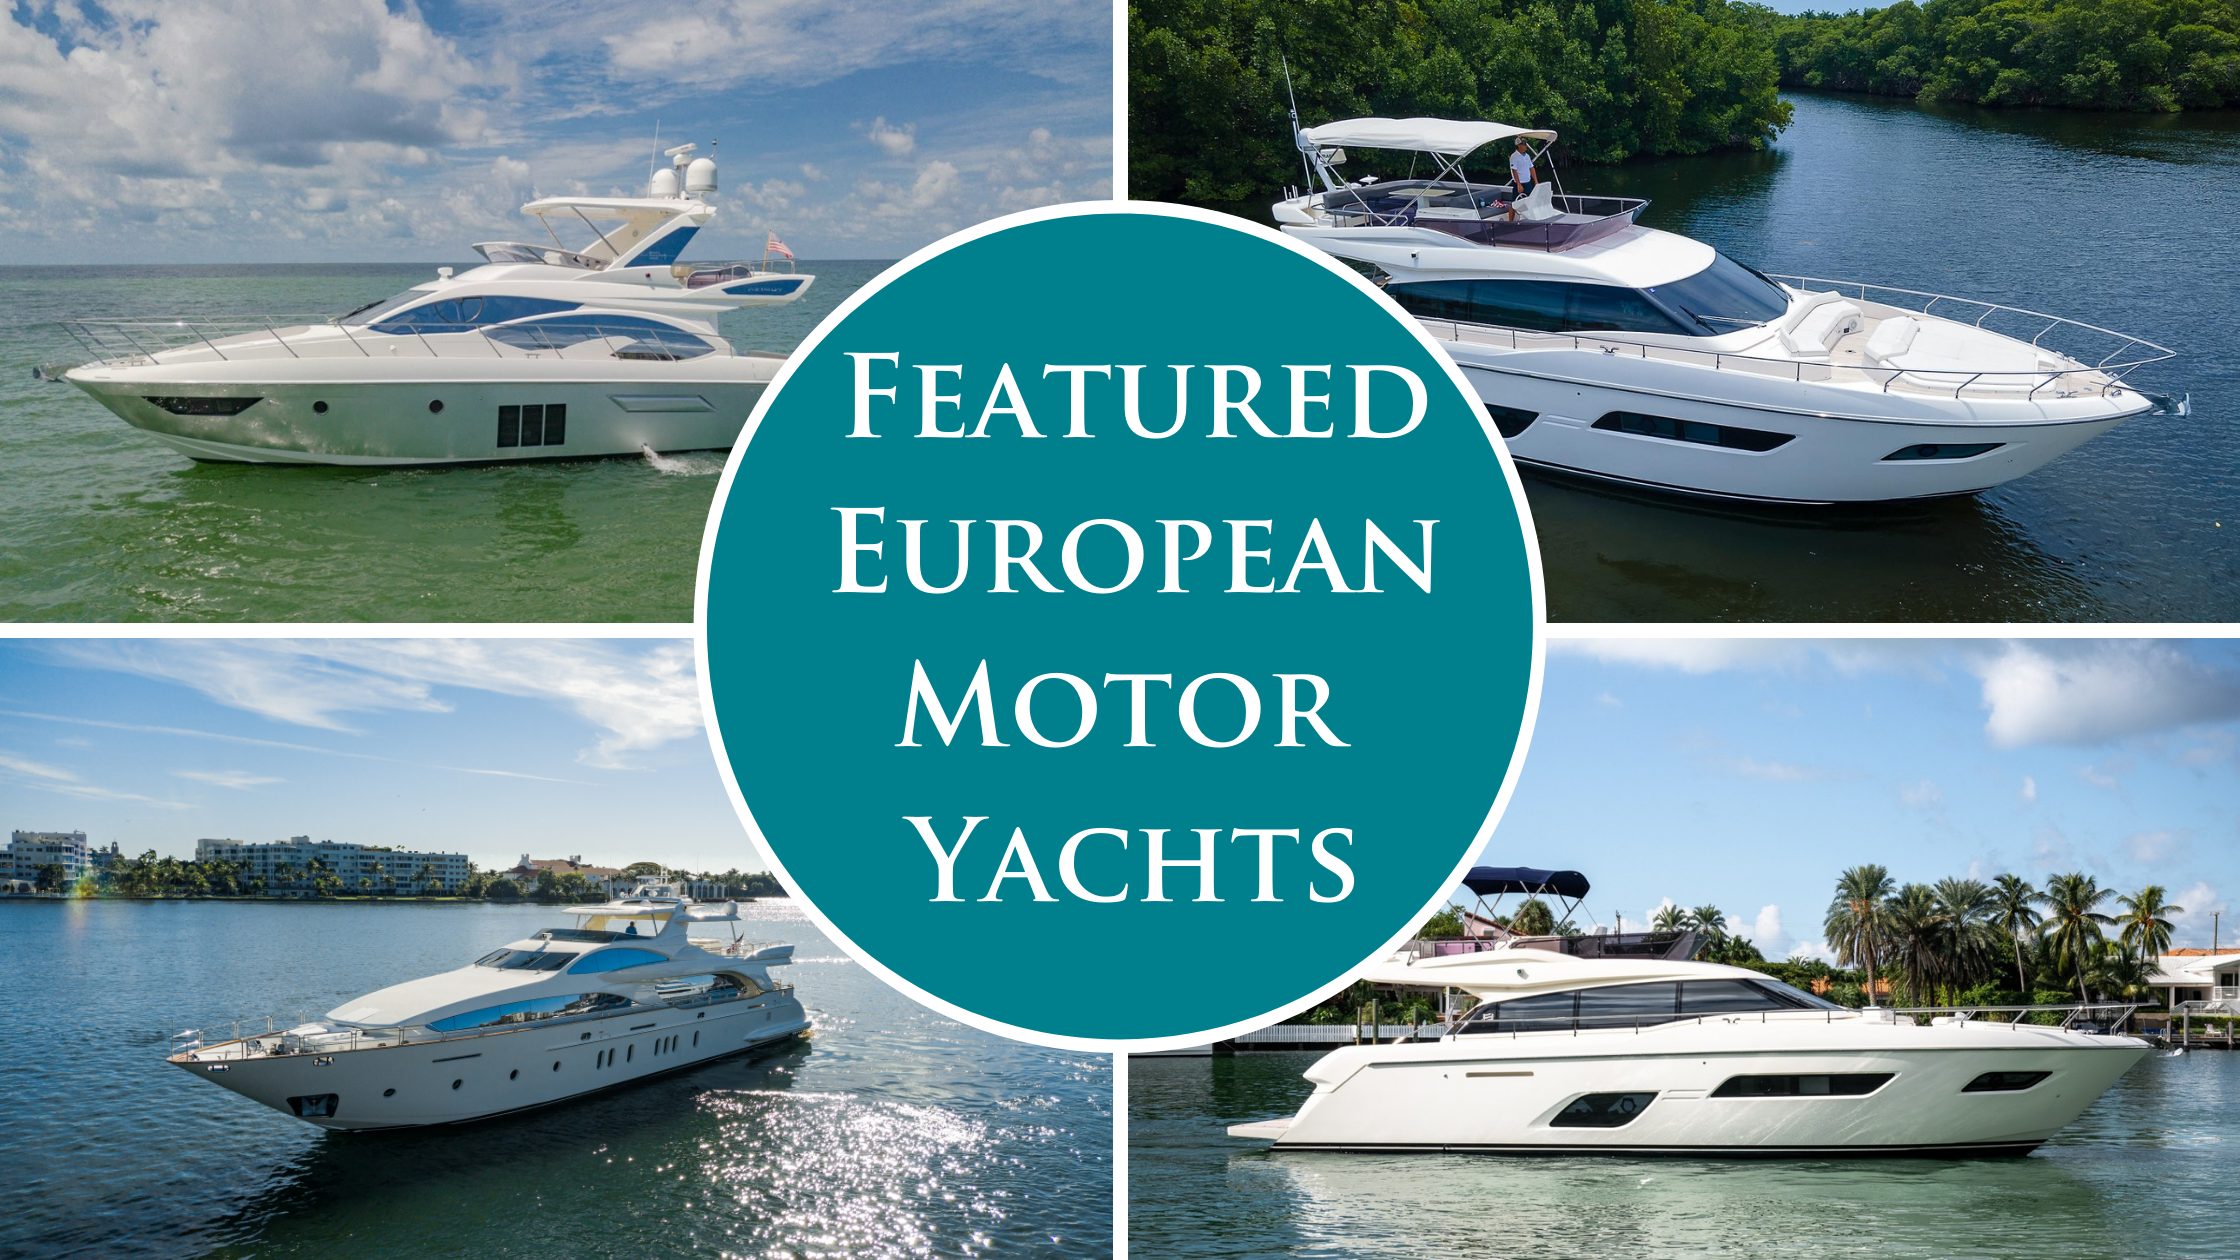 Featured European Motor Yacht Listings at HMY